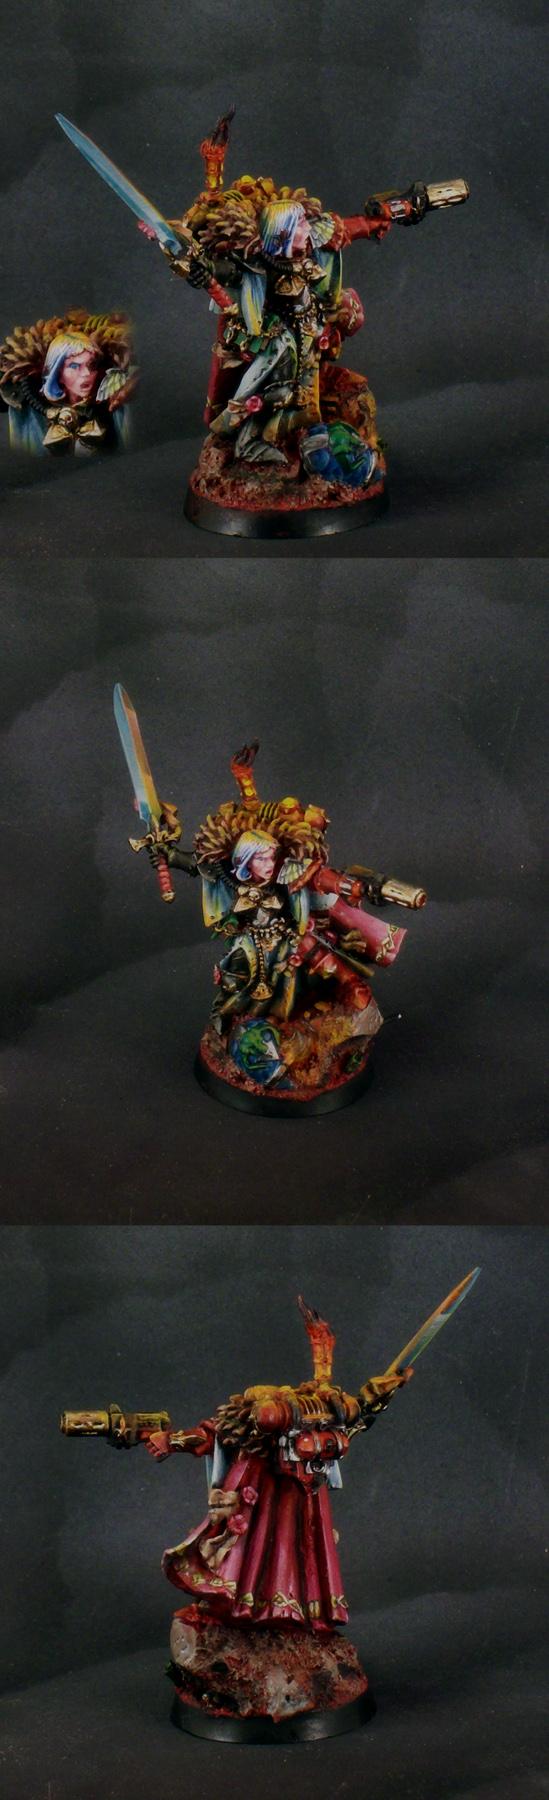 Canoness, Sisters Of Battle, Warhammer 40,000